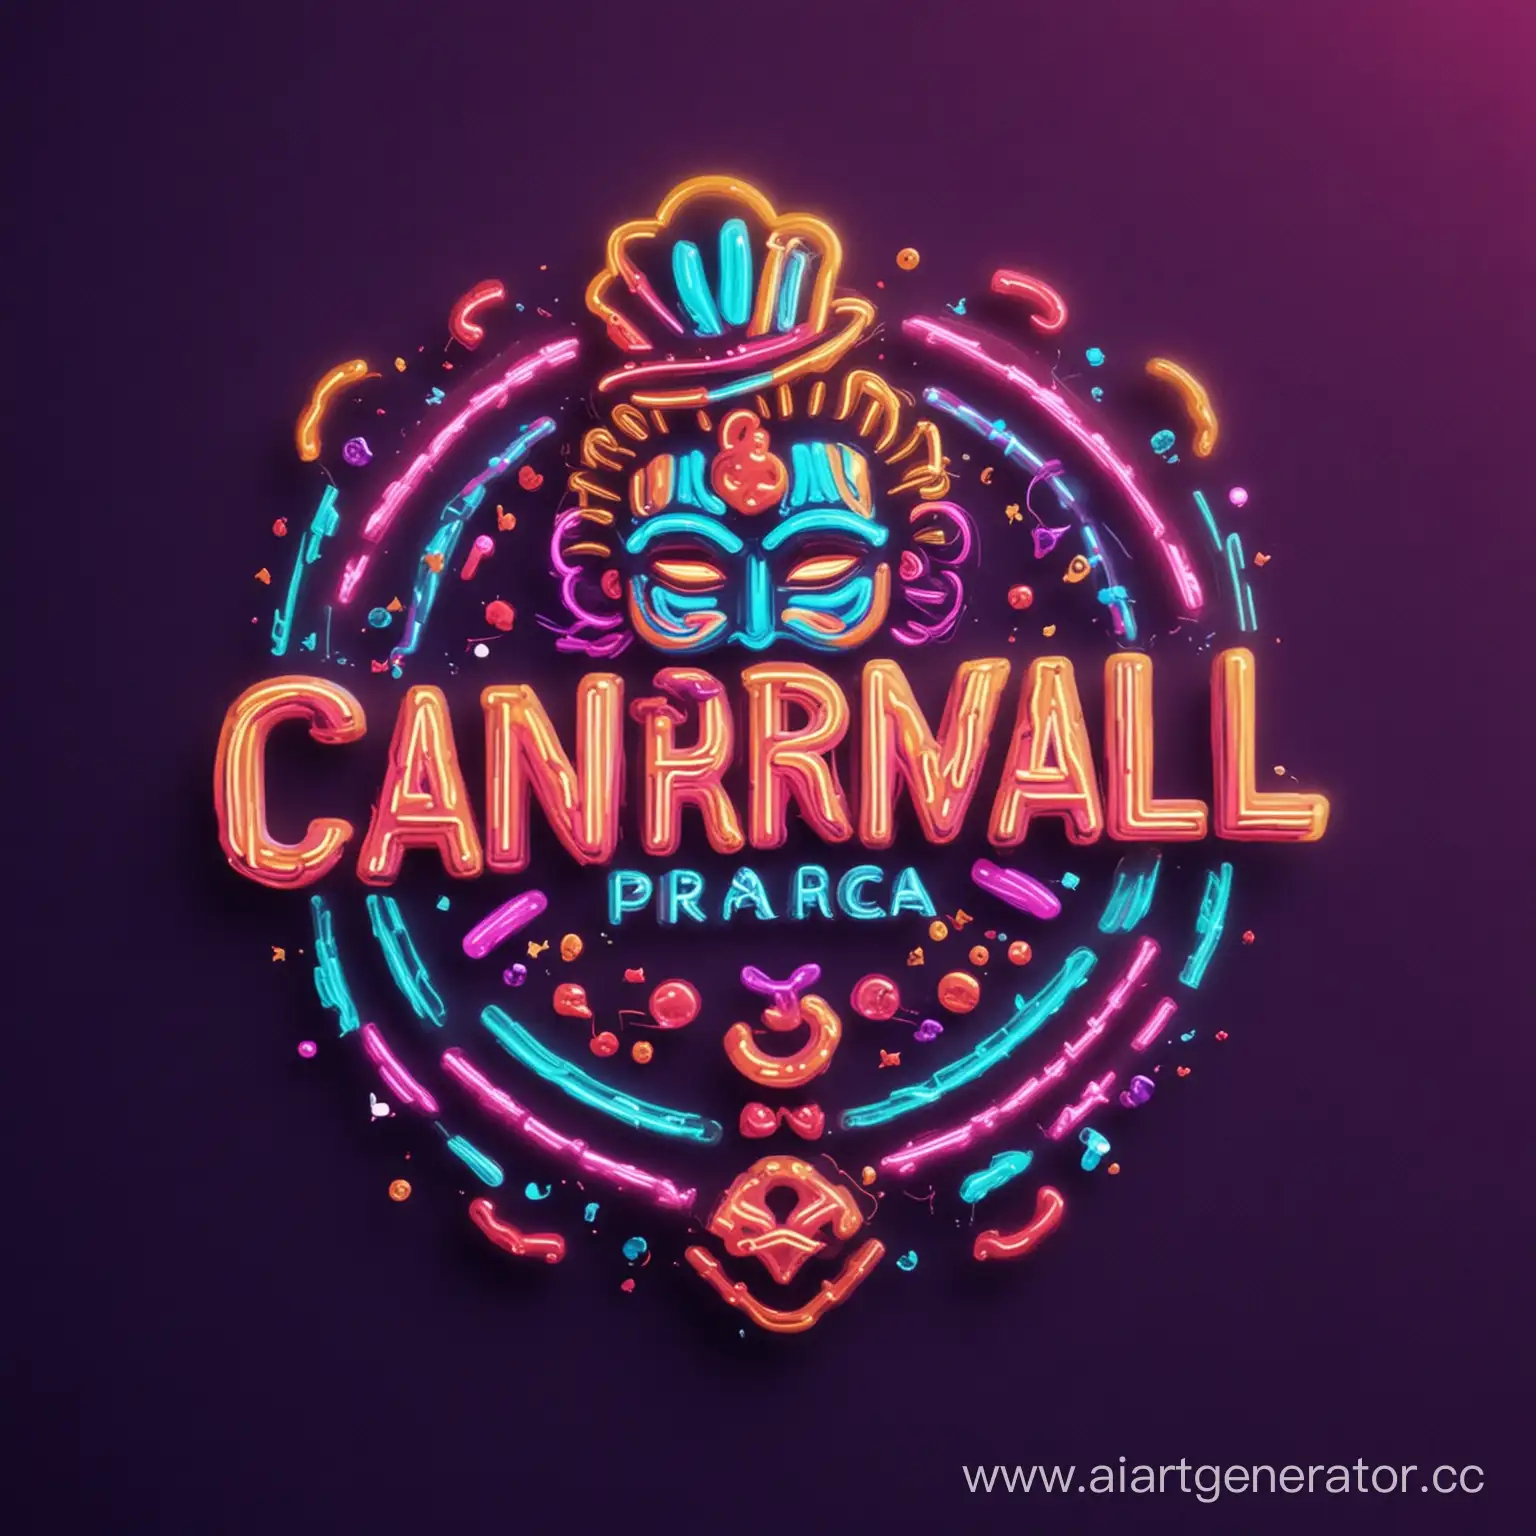 Neon-Carnival-Logo-for-Pharmaceutical-Company-Event